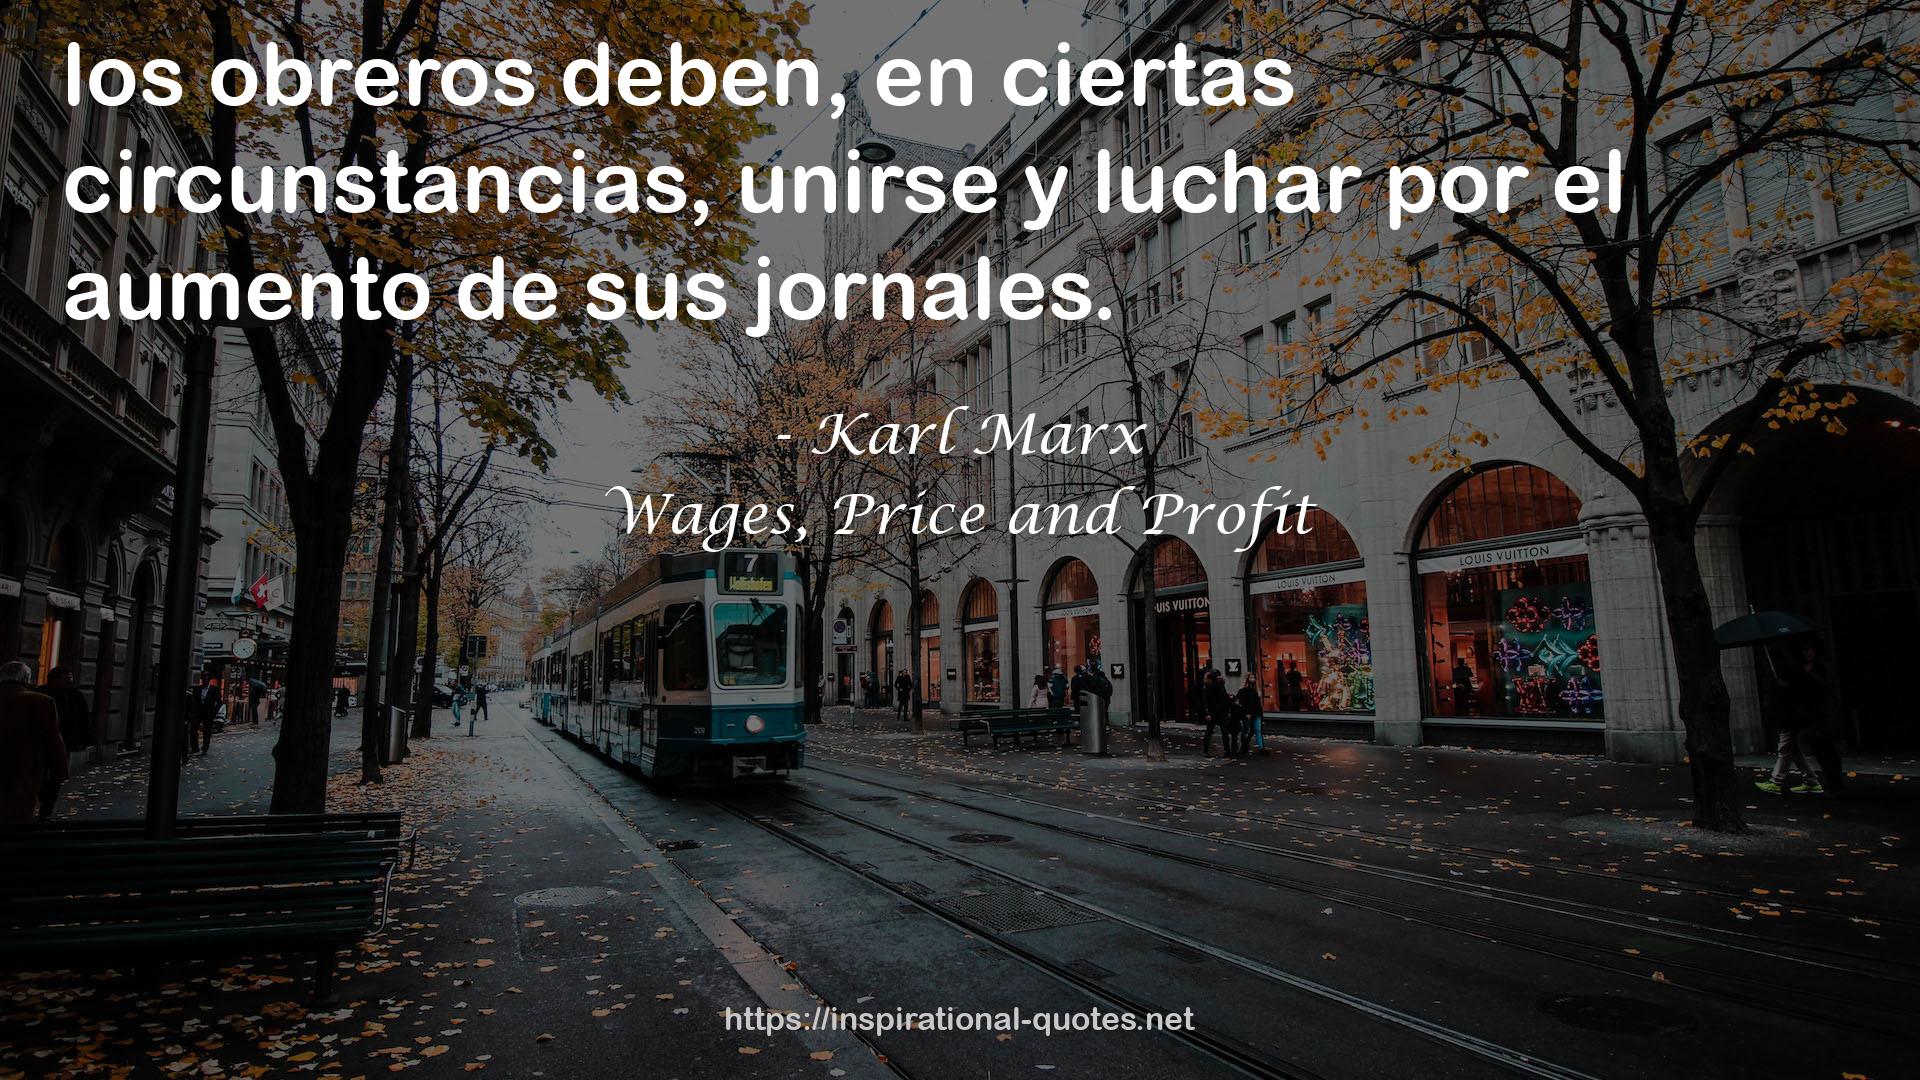 Wages, Price and Profit QUOTES